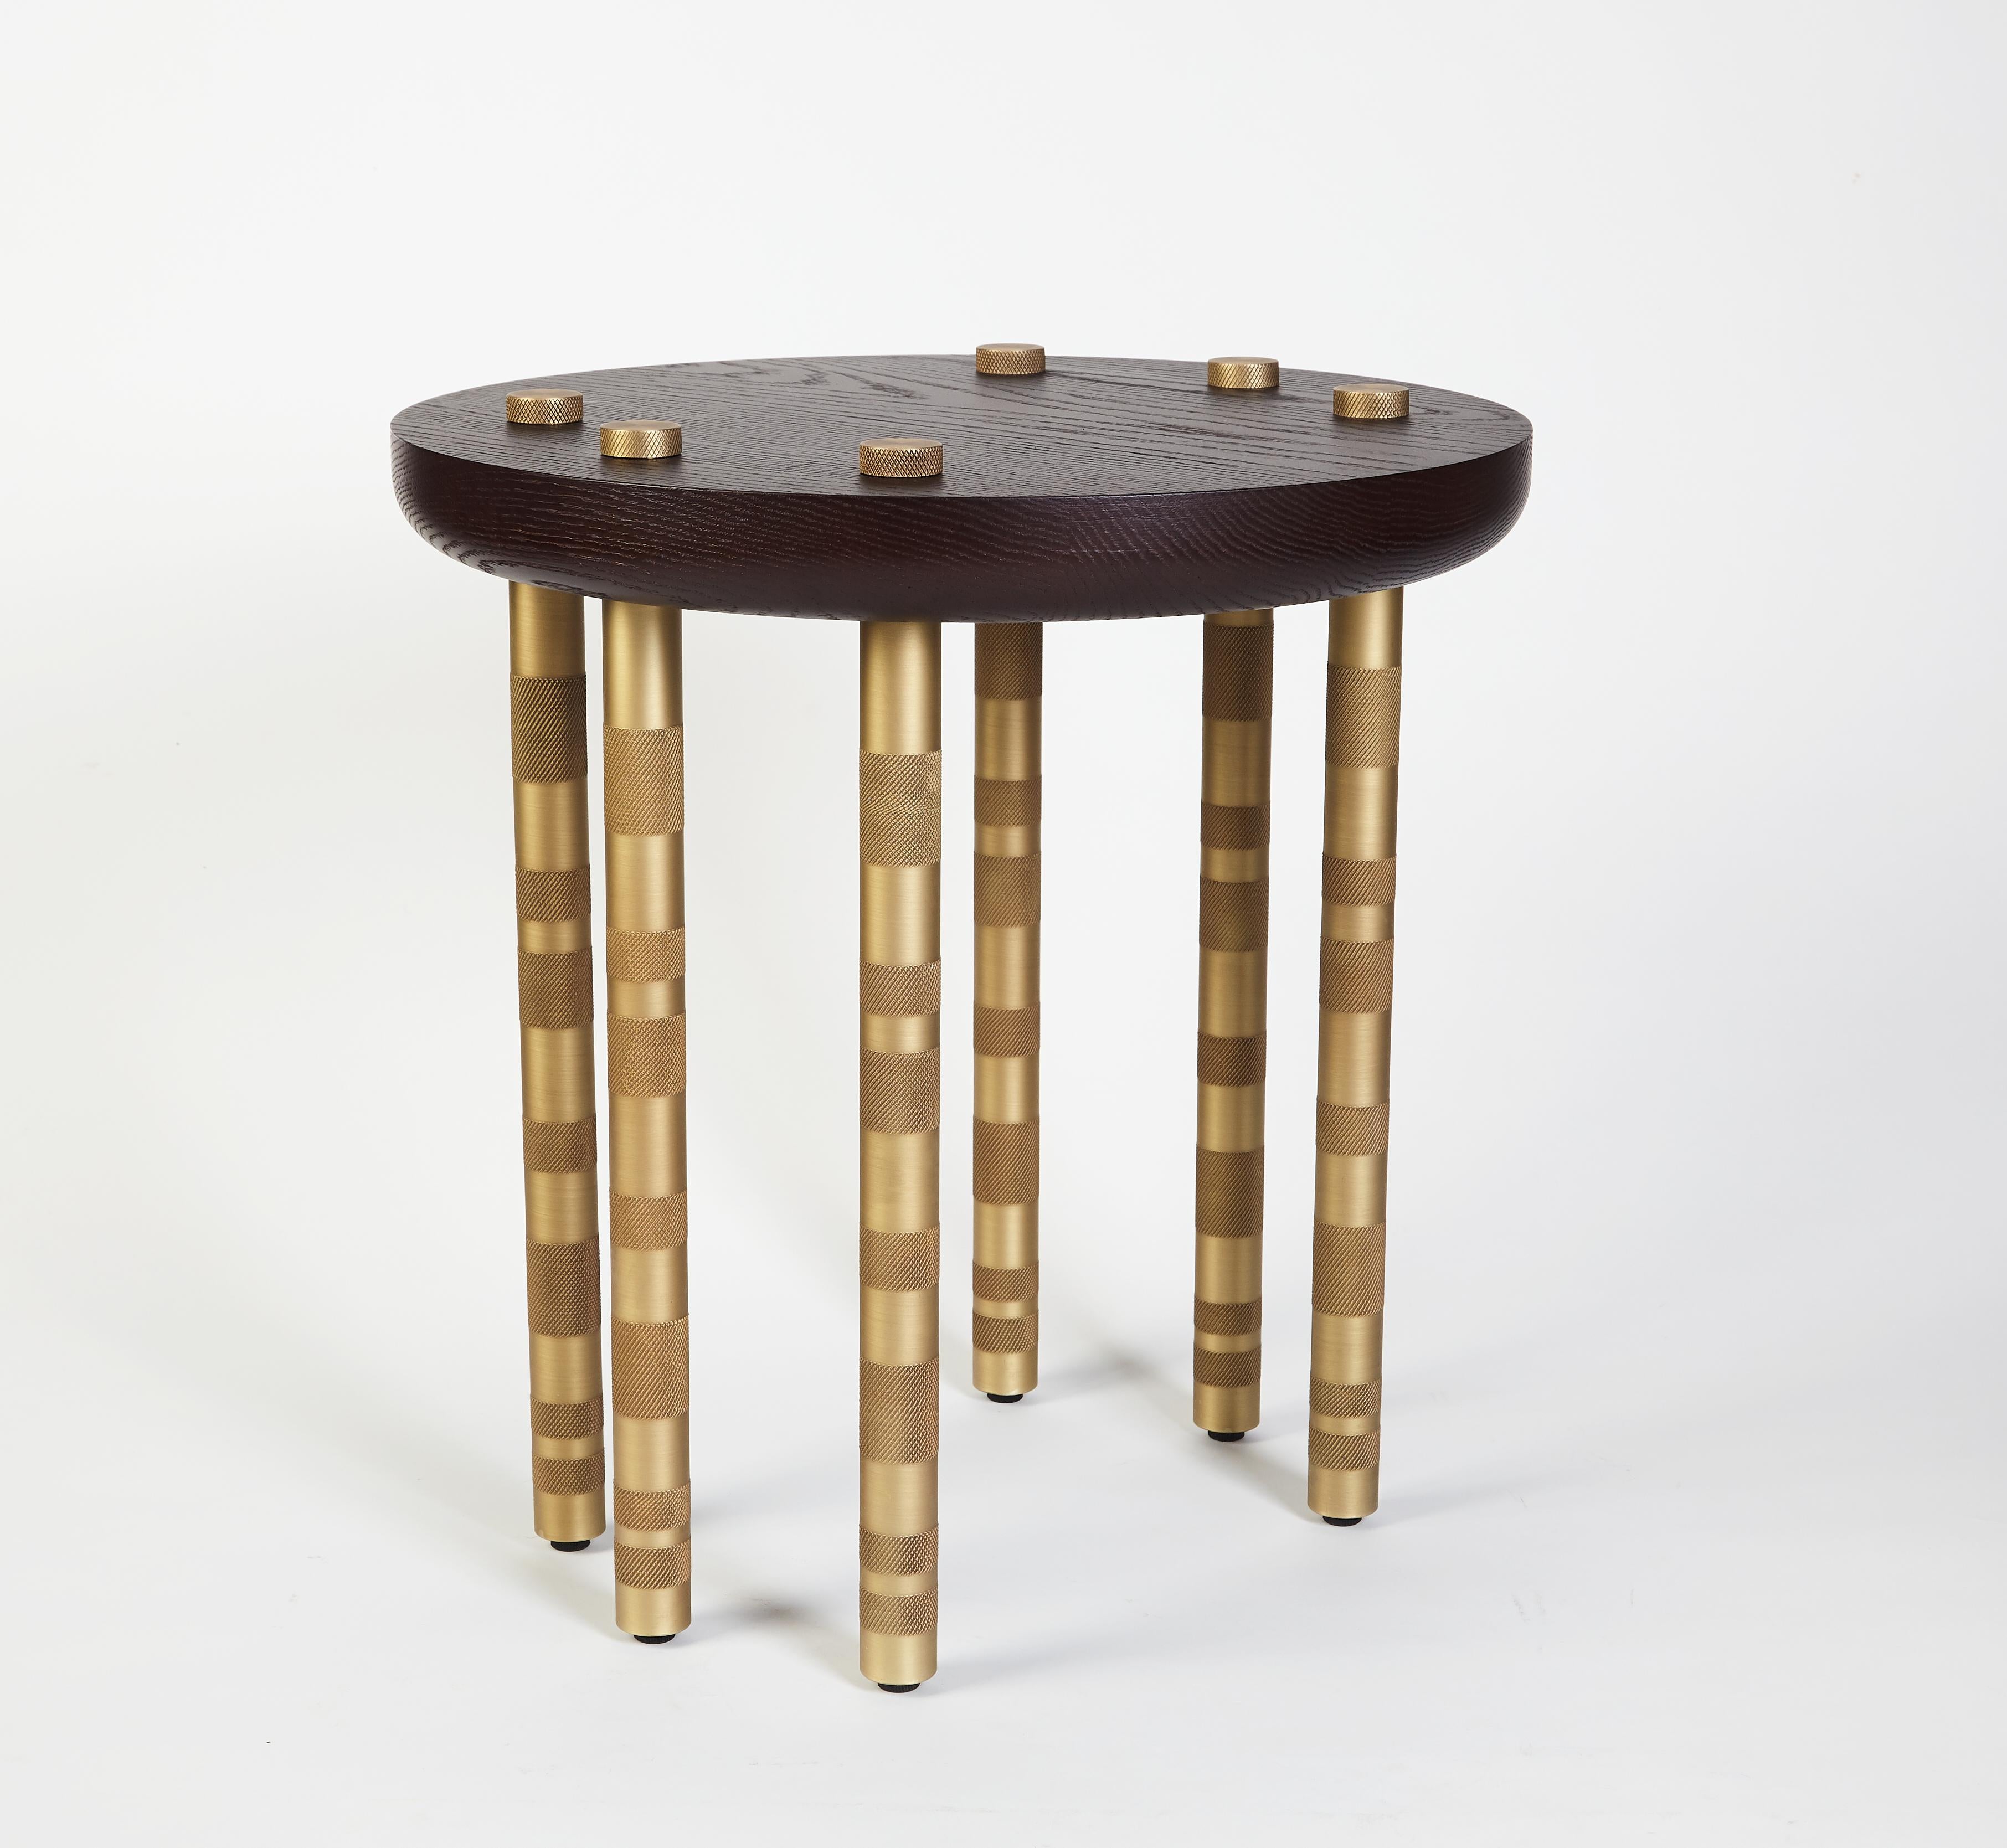 Ipanema Brass Side Table, Wood Top and Brushed Brass Legs, Handcrafted by Duistt

The rounded geometric shapes of the ipanema series refer to the imagination of the well-known sidewalk in rio de janeiro. We wanted to invest in with colours that